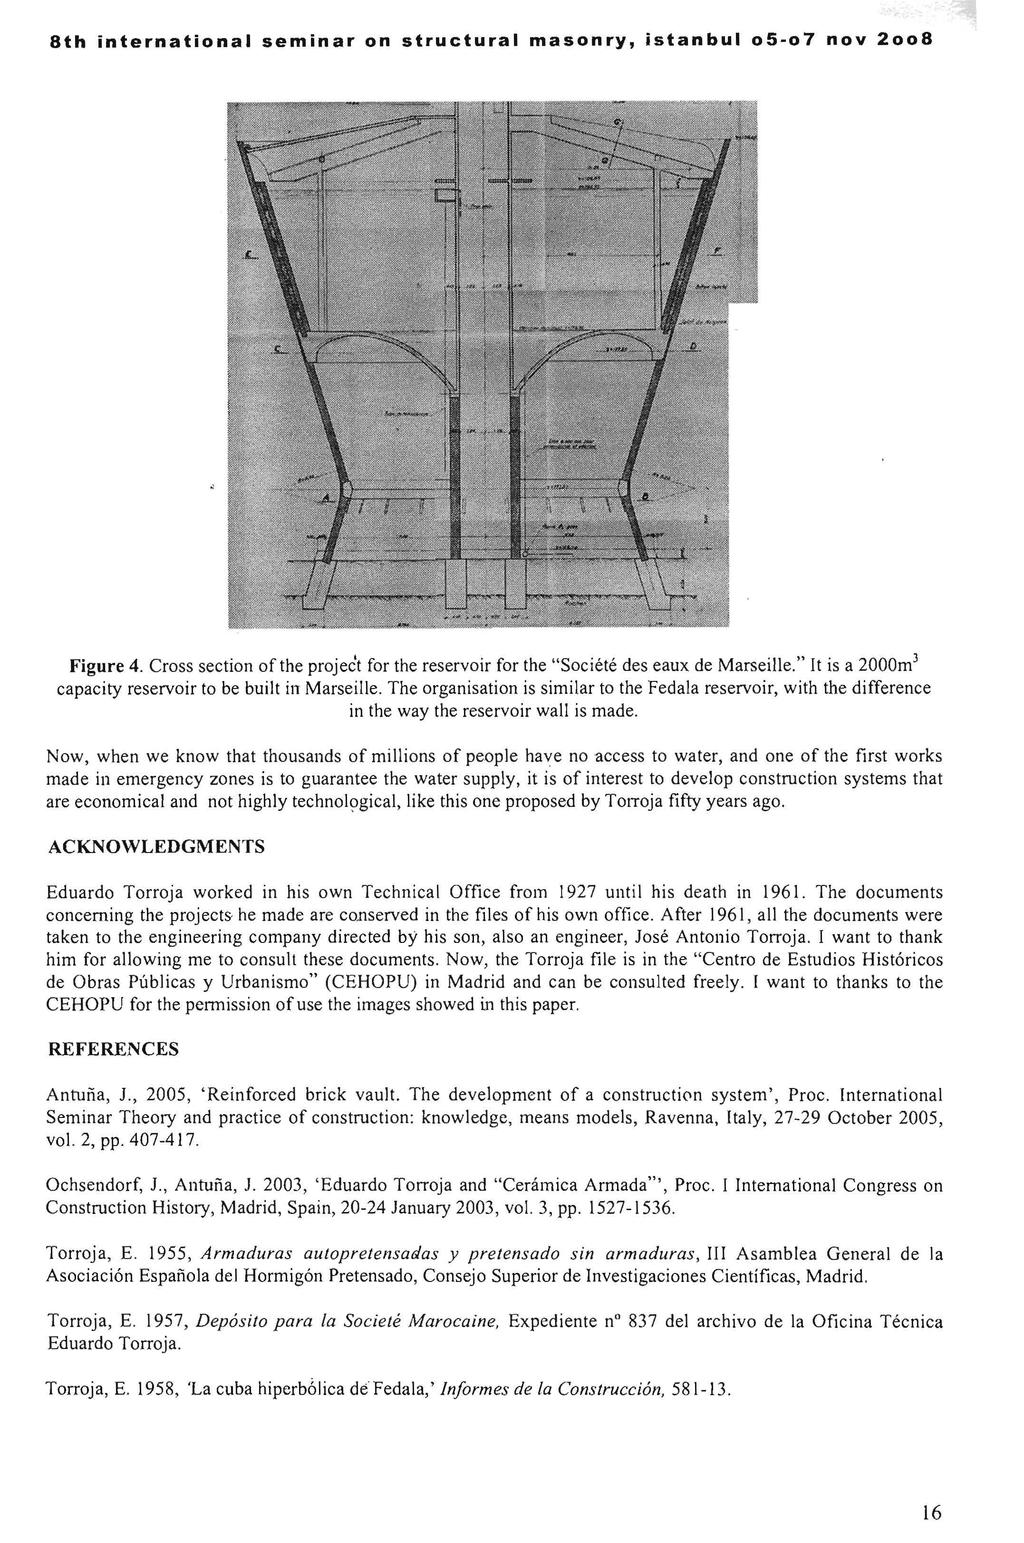 8th international seminar on structural masonry, istanbul 05-07 noy 2008 Figure 4. Cross section of the project for the reservoir for the "Societe des eaux de Marseille.